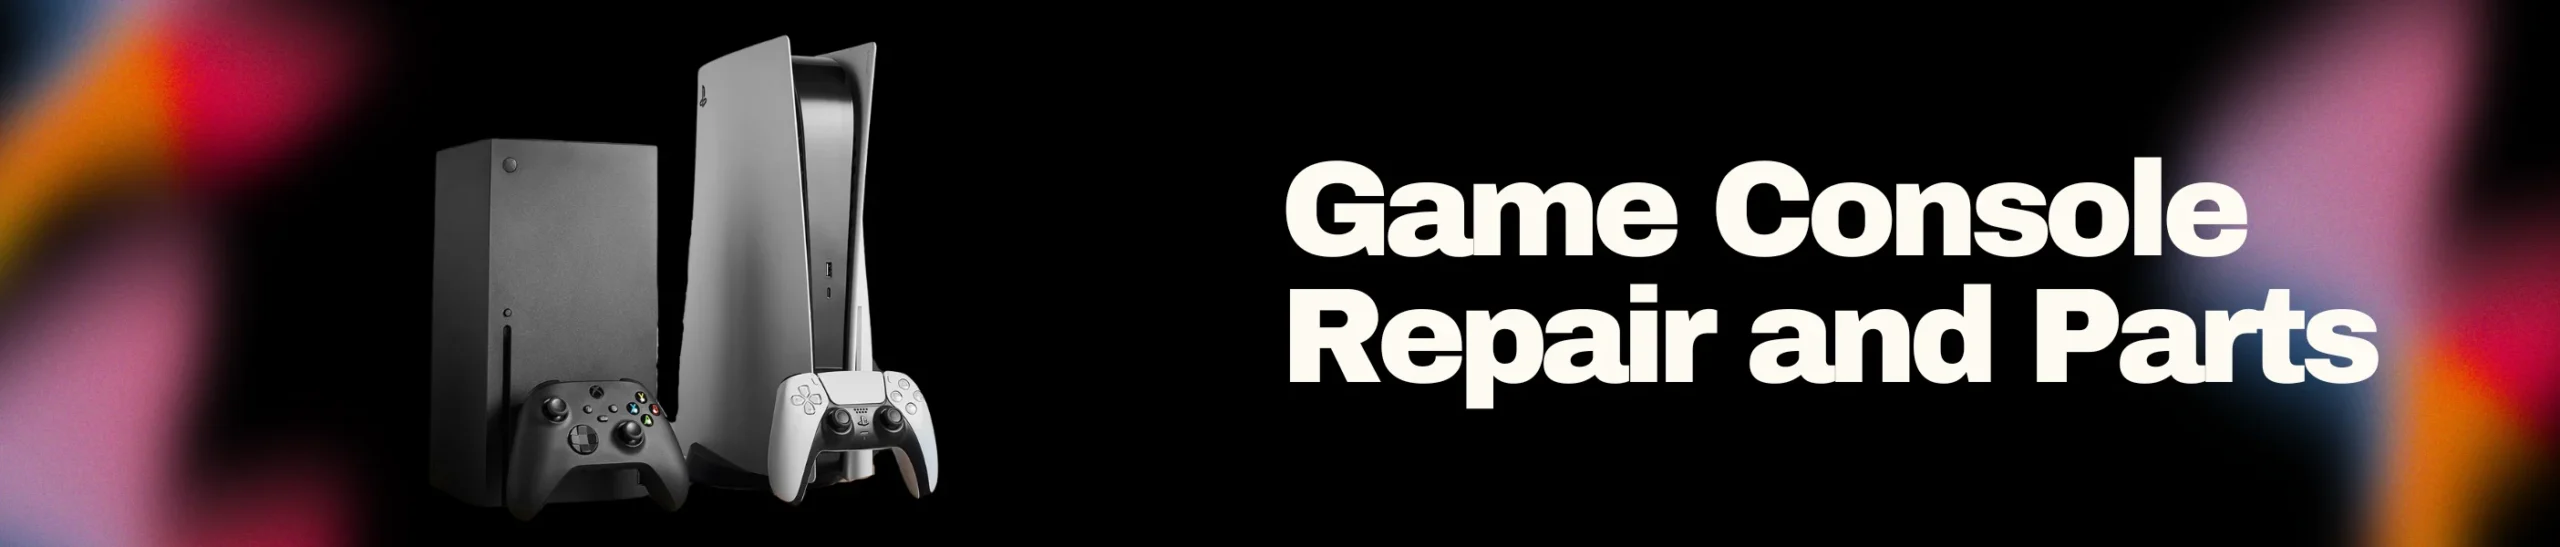 game console repairs, components and parts, xbox one playstation 5